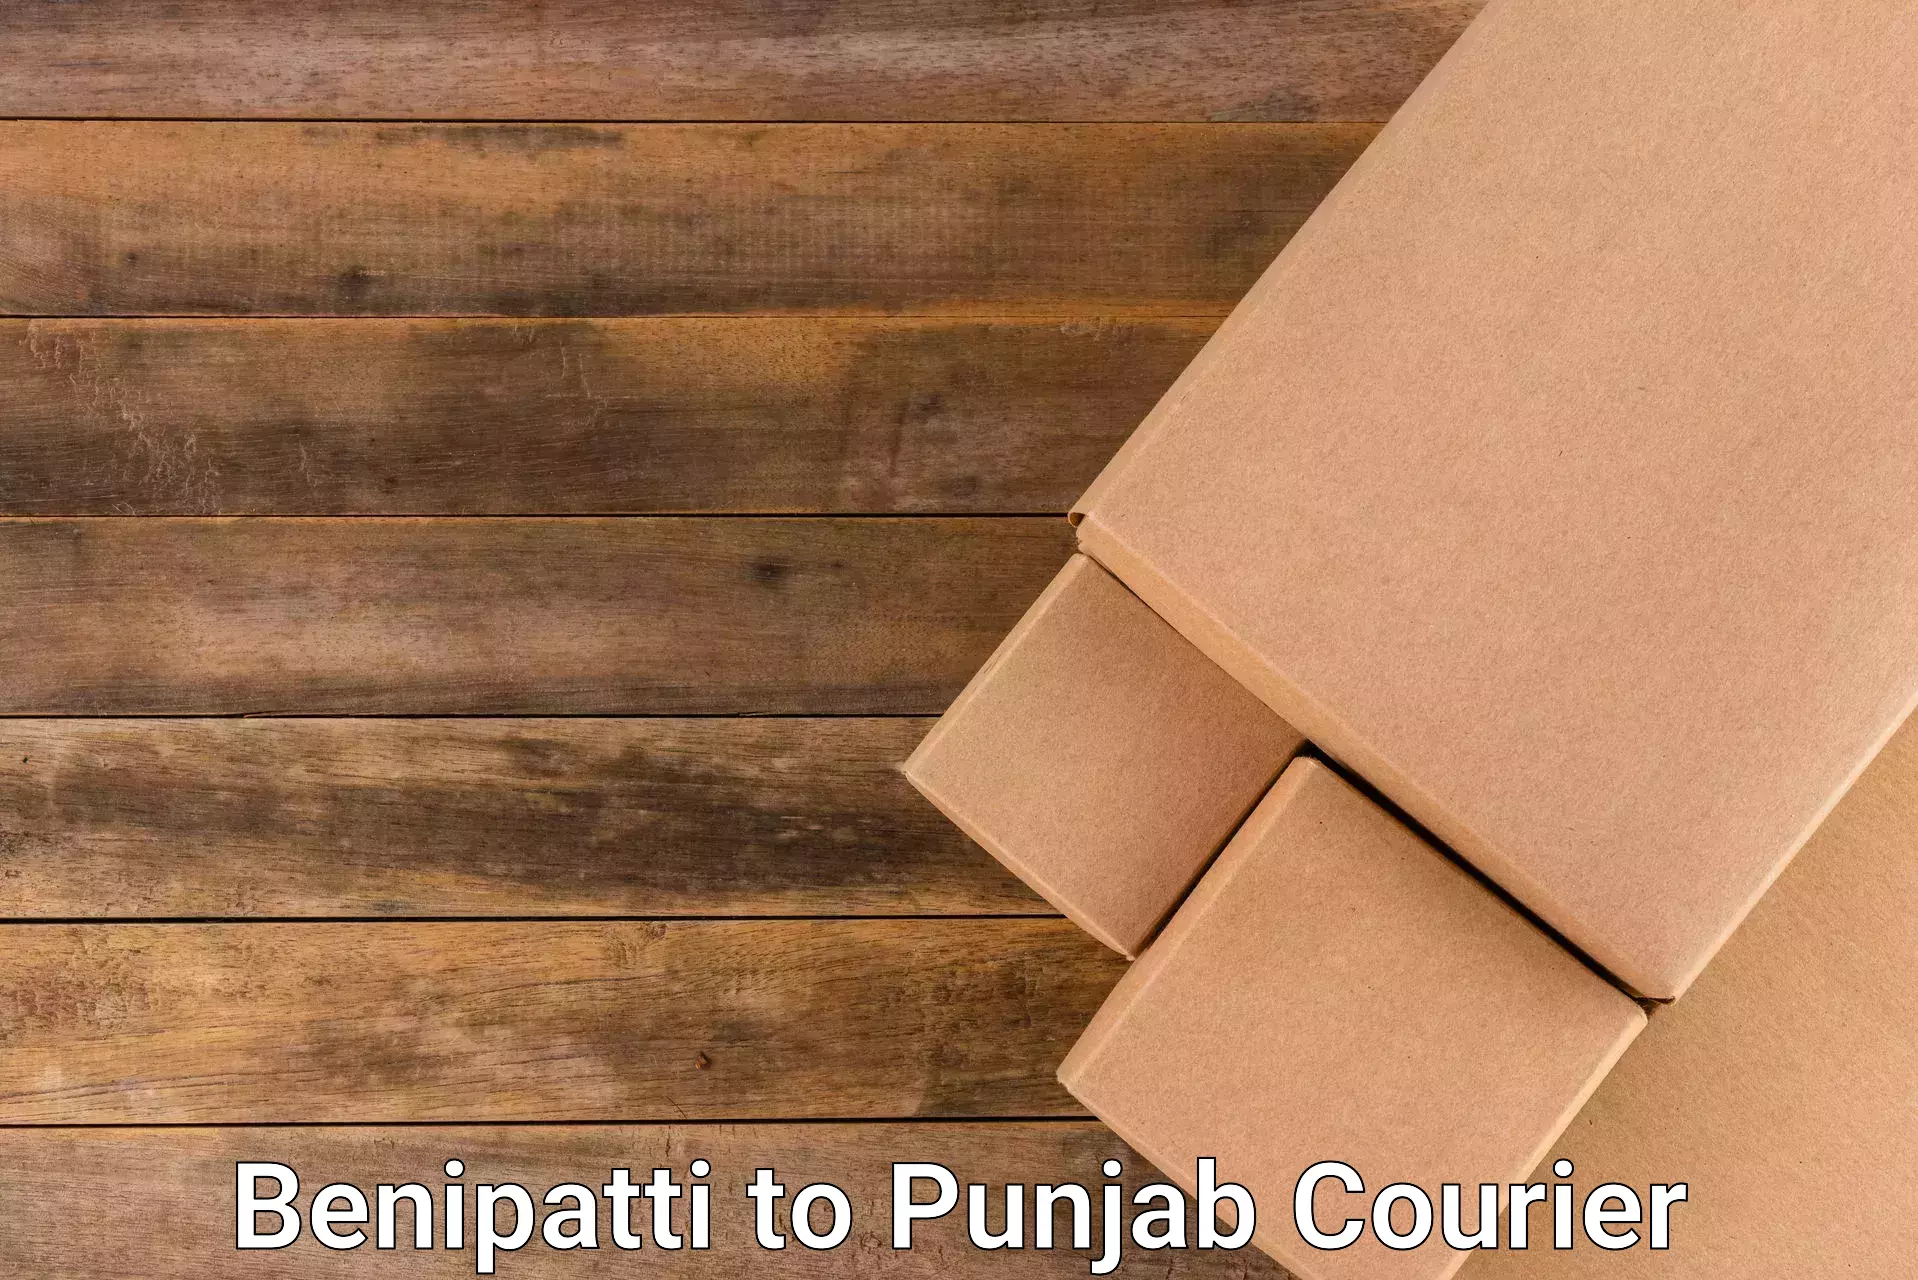 Efficient parcel tracking in Benipatti to Mohali